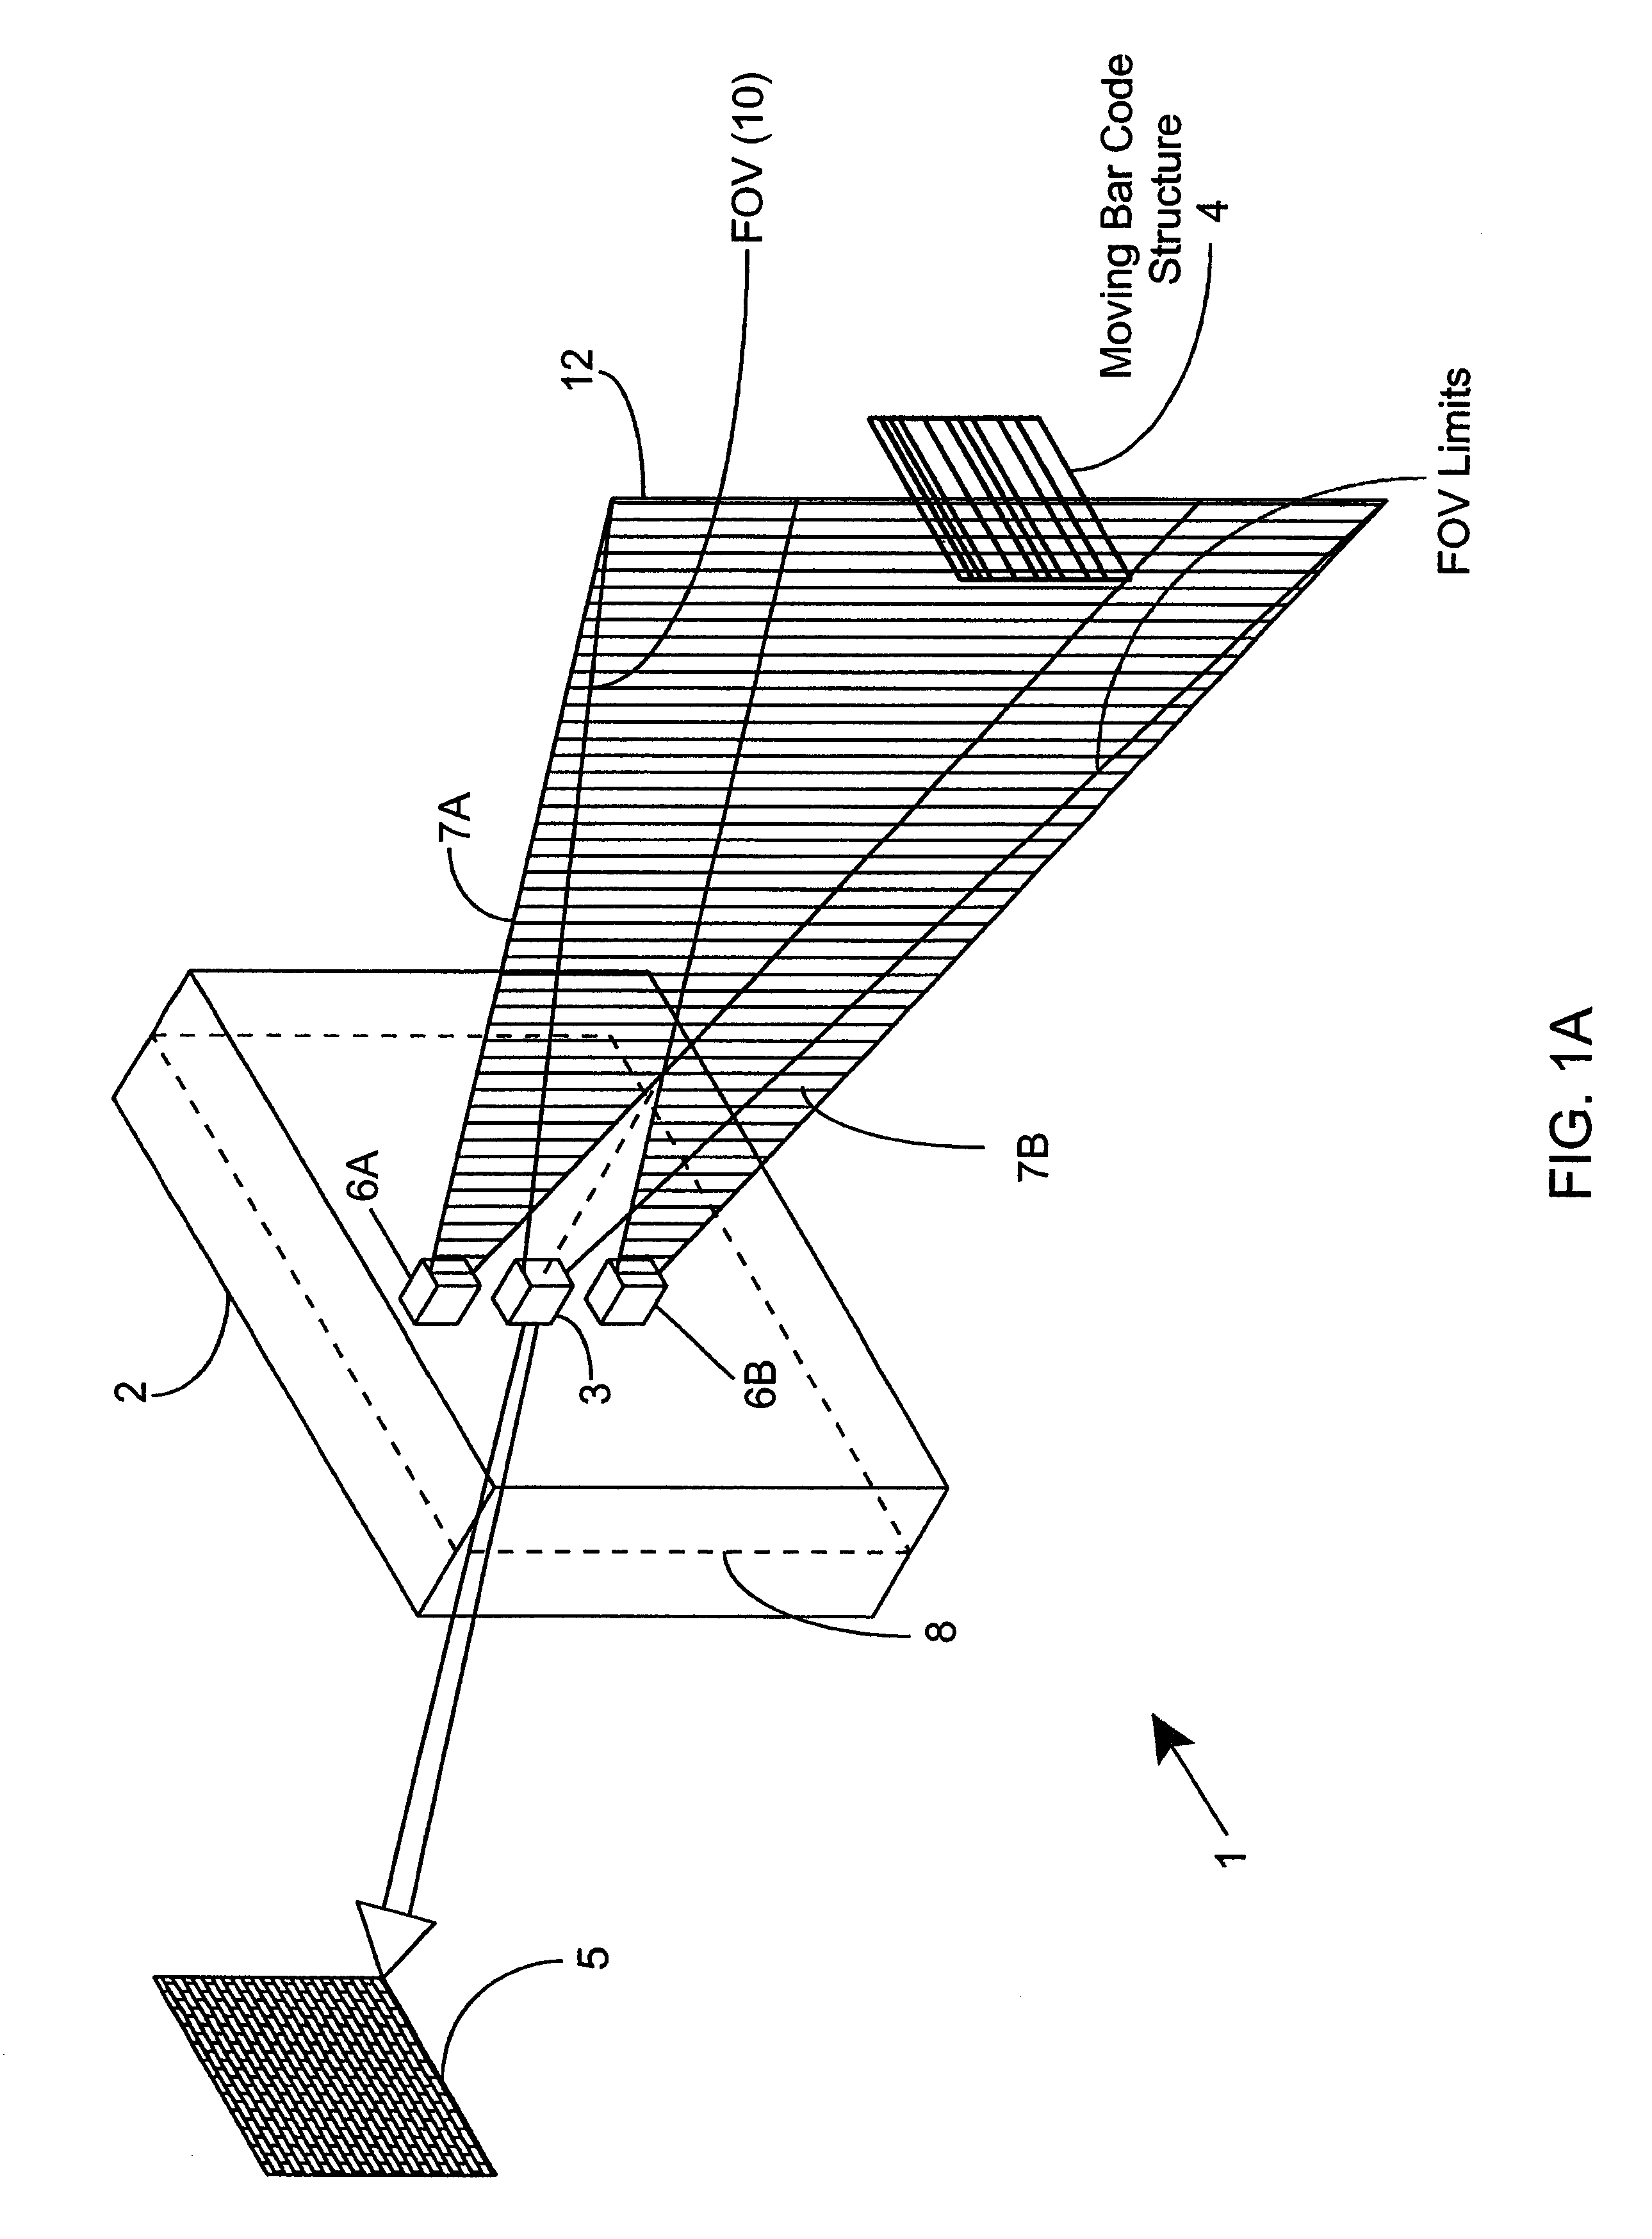 Method of and system for producing images of objects using planar laser illumination beams and image detection arrays